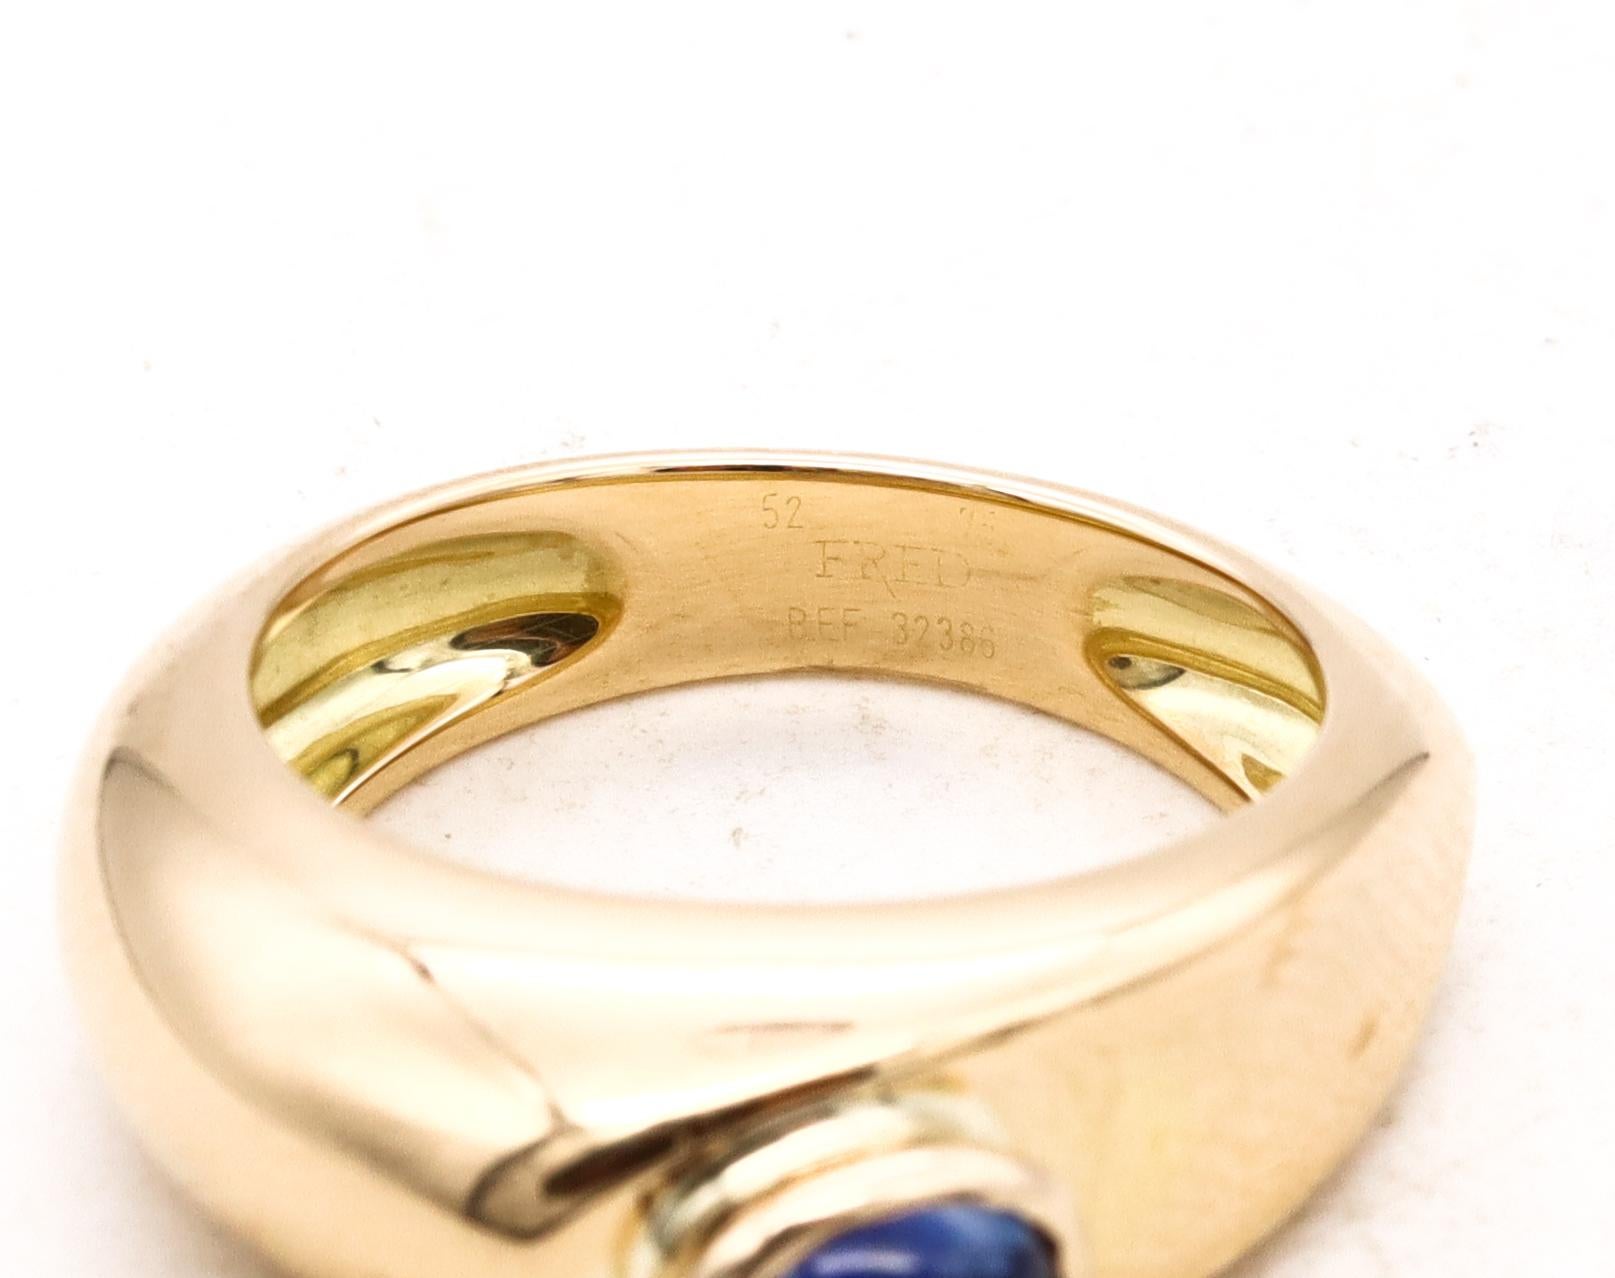 Fred of Paris Modernist Gem Set Ring 18Kt Yellow Gold 0.96 Cts Ceylon Sapphire For Sale 1